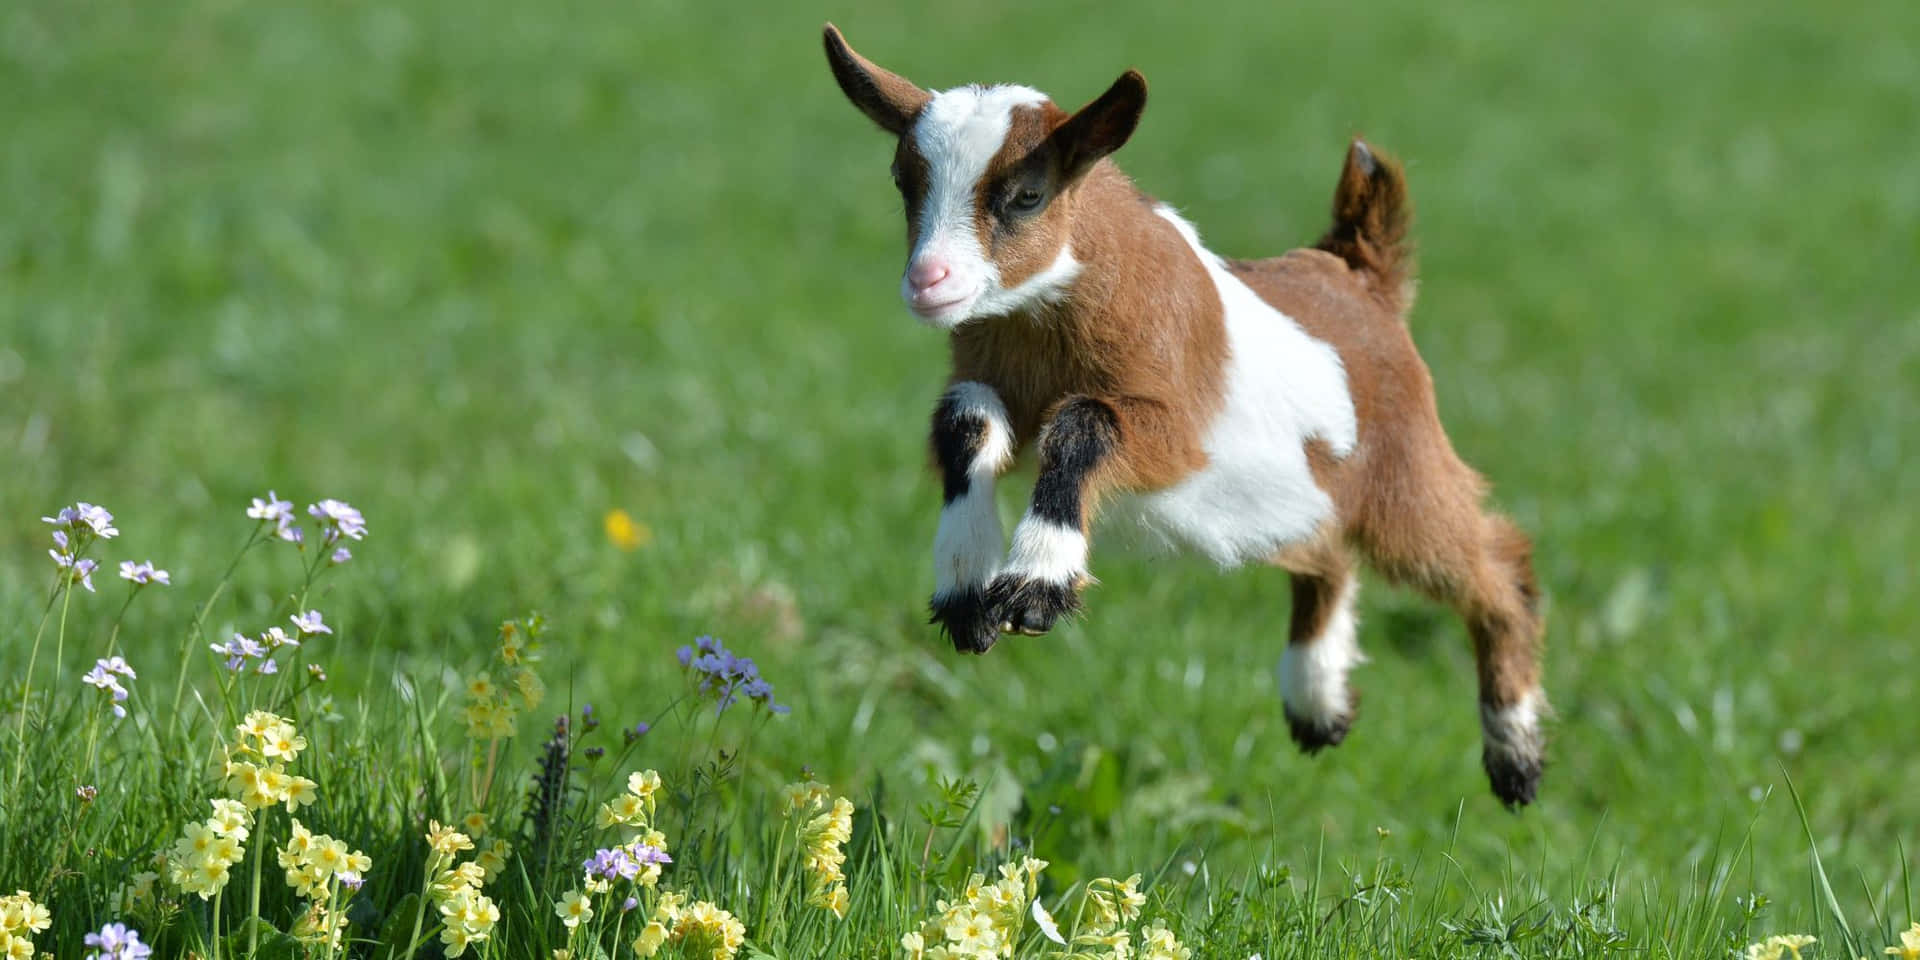 Baby Cute Goat Jumping On Grass Picture